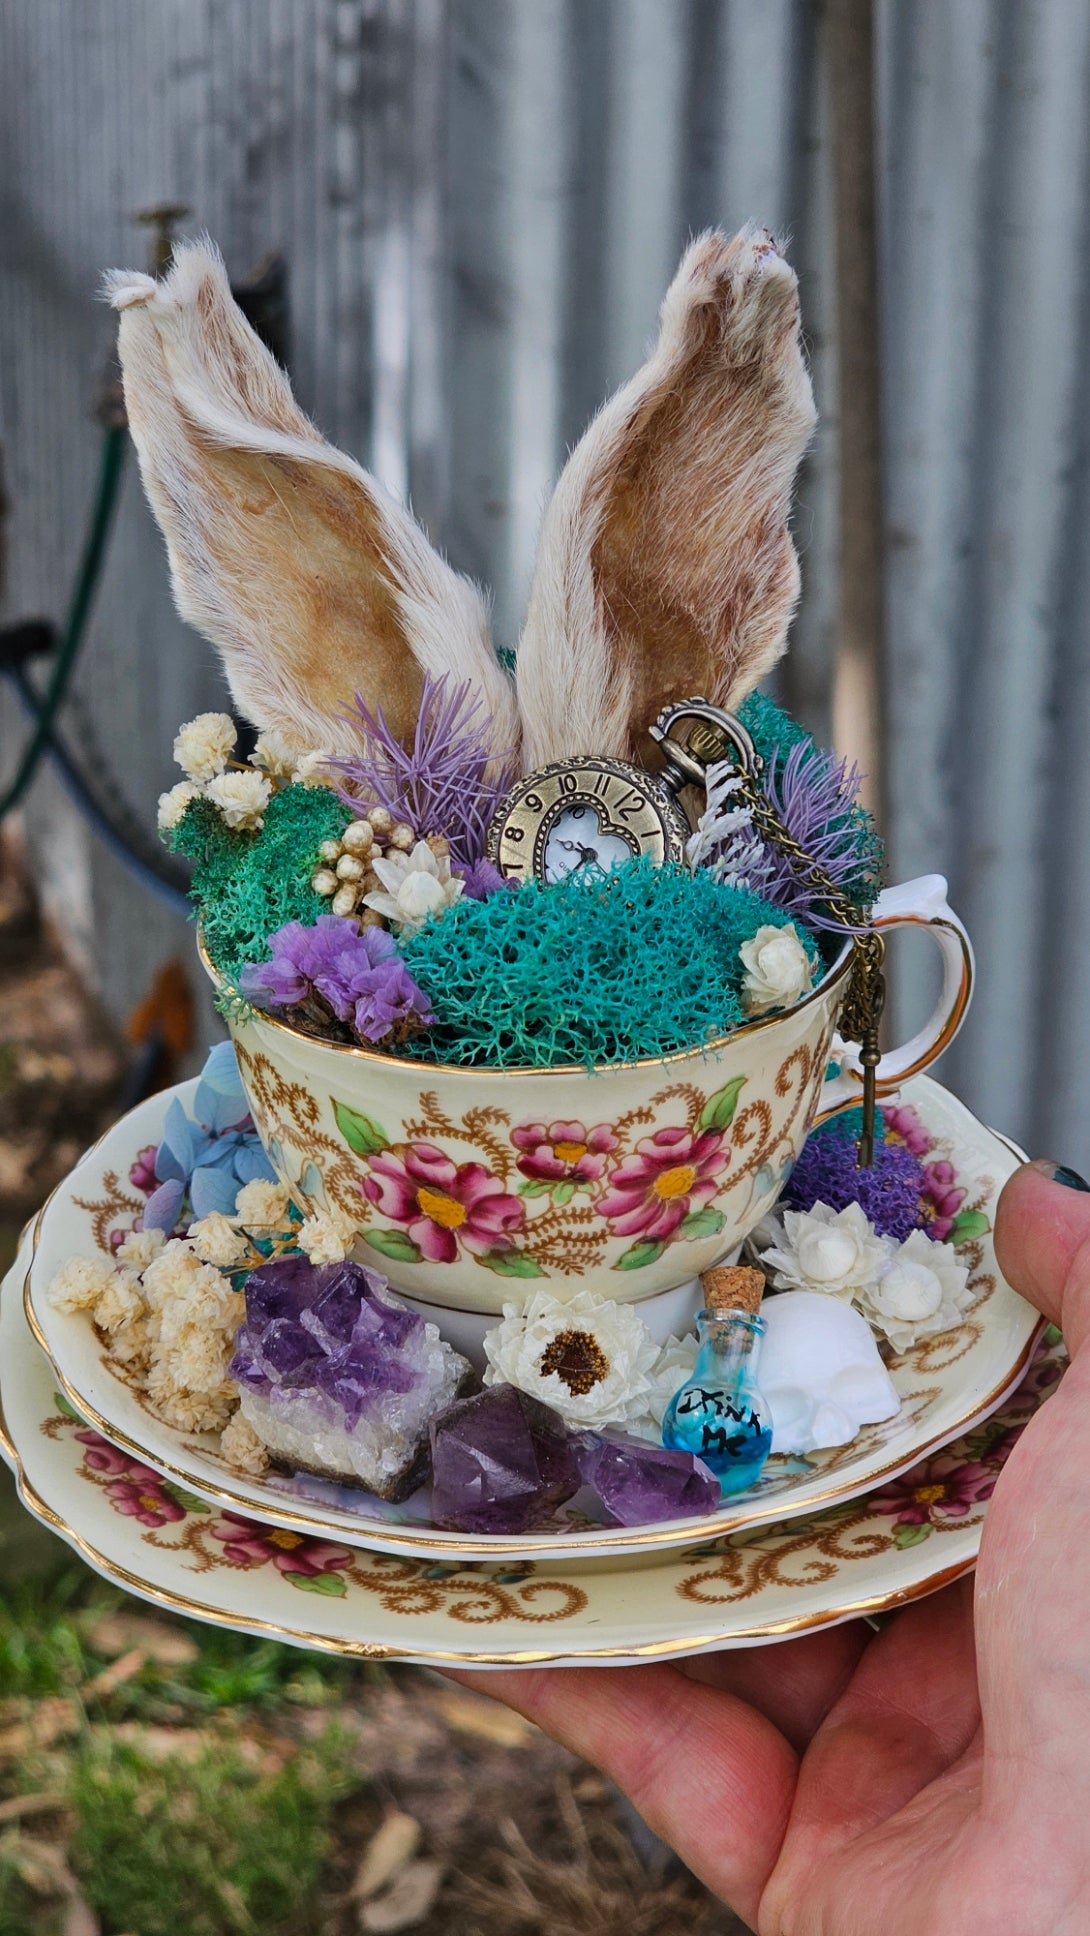 Real bunny ears - Alice in Wonderland cups